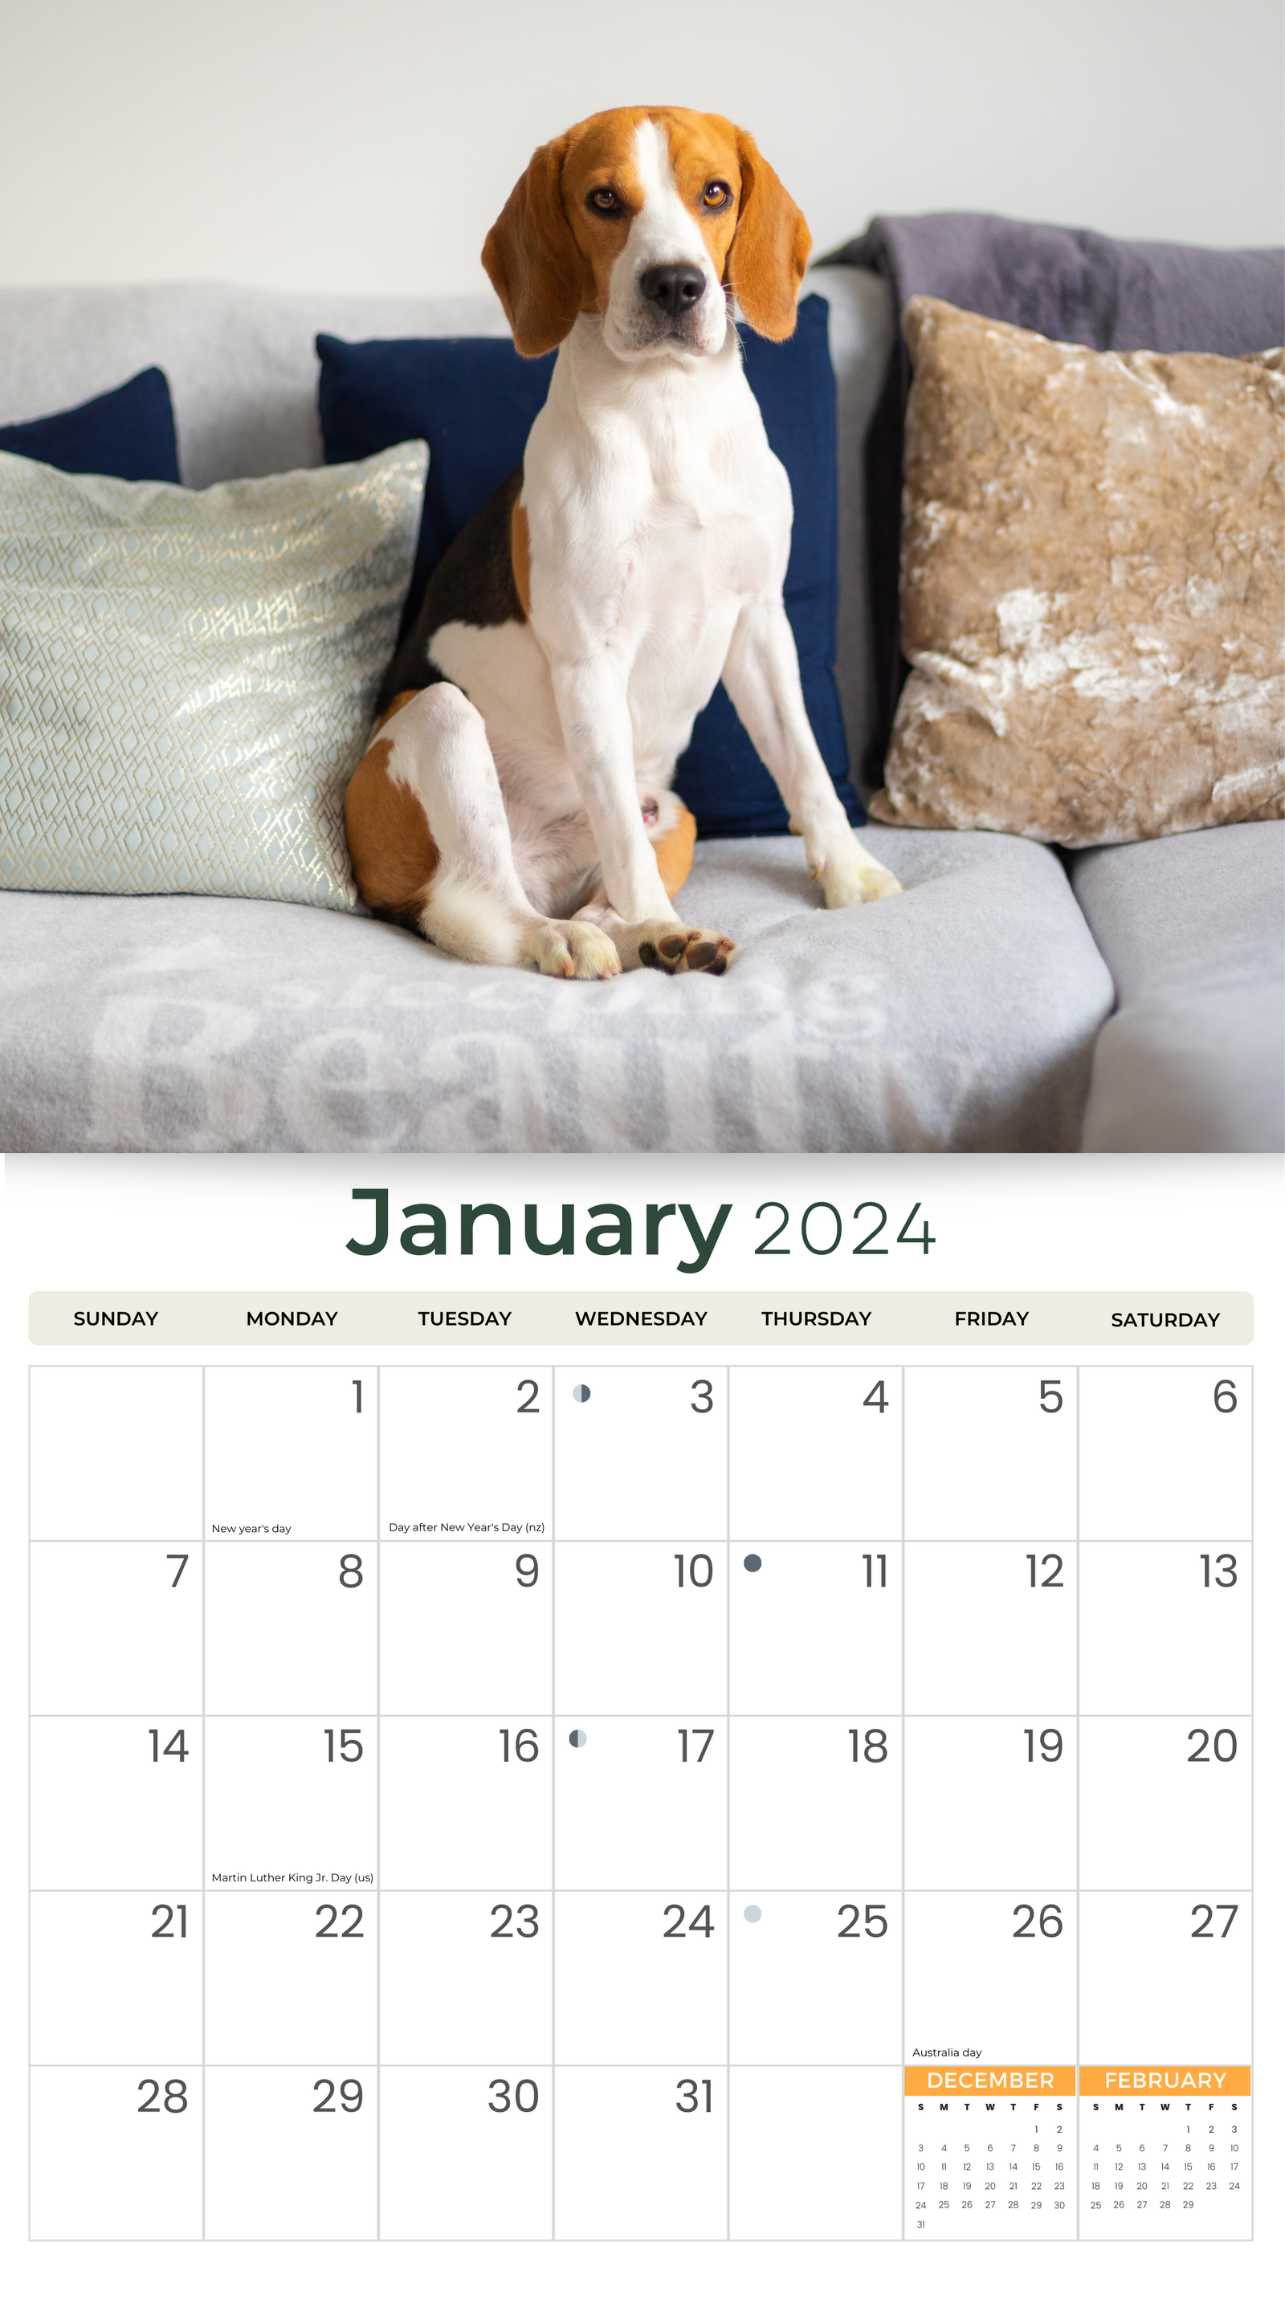 2024 Beagles Dogs & Puppies - Deluxe Wall Calendar by Just Calendars - 16 Month - Plastic Free